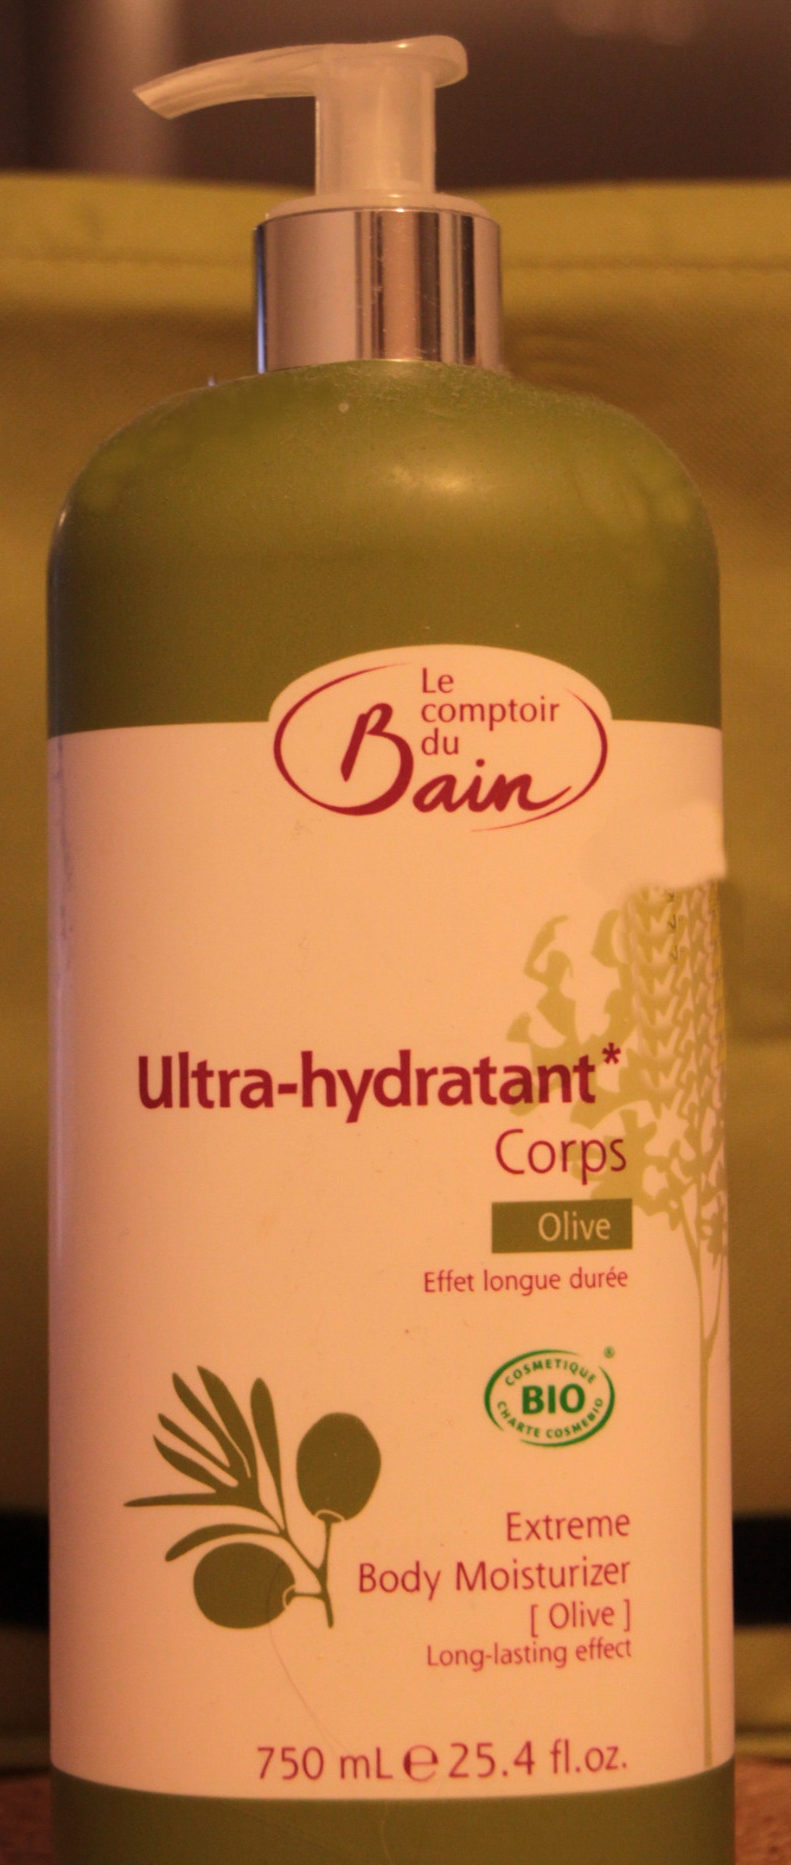 Ultra-hydratant Corps Olive - Product - fr